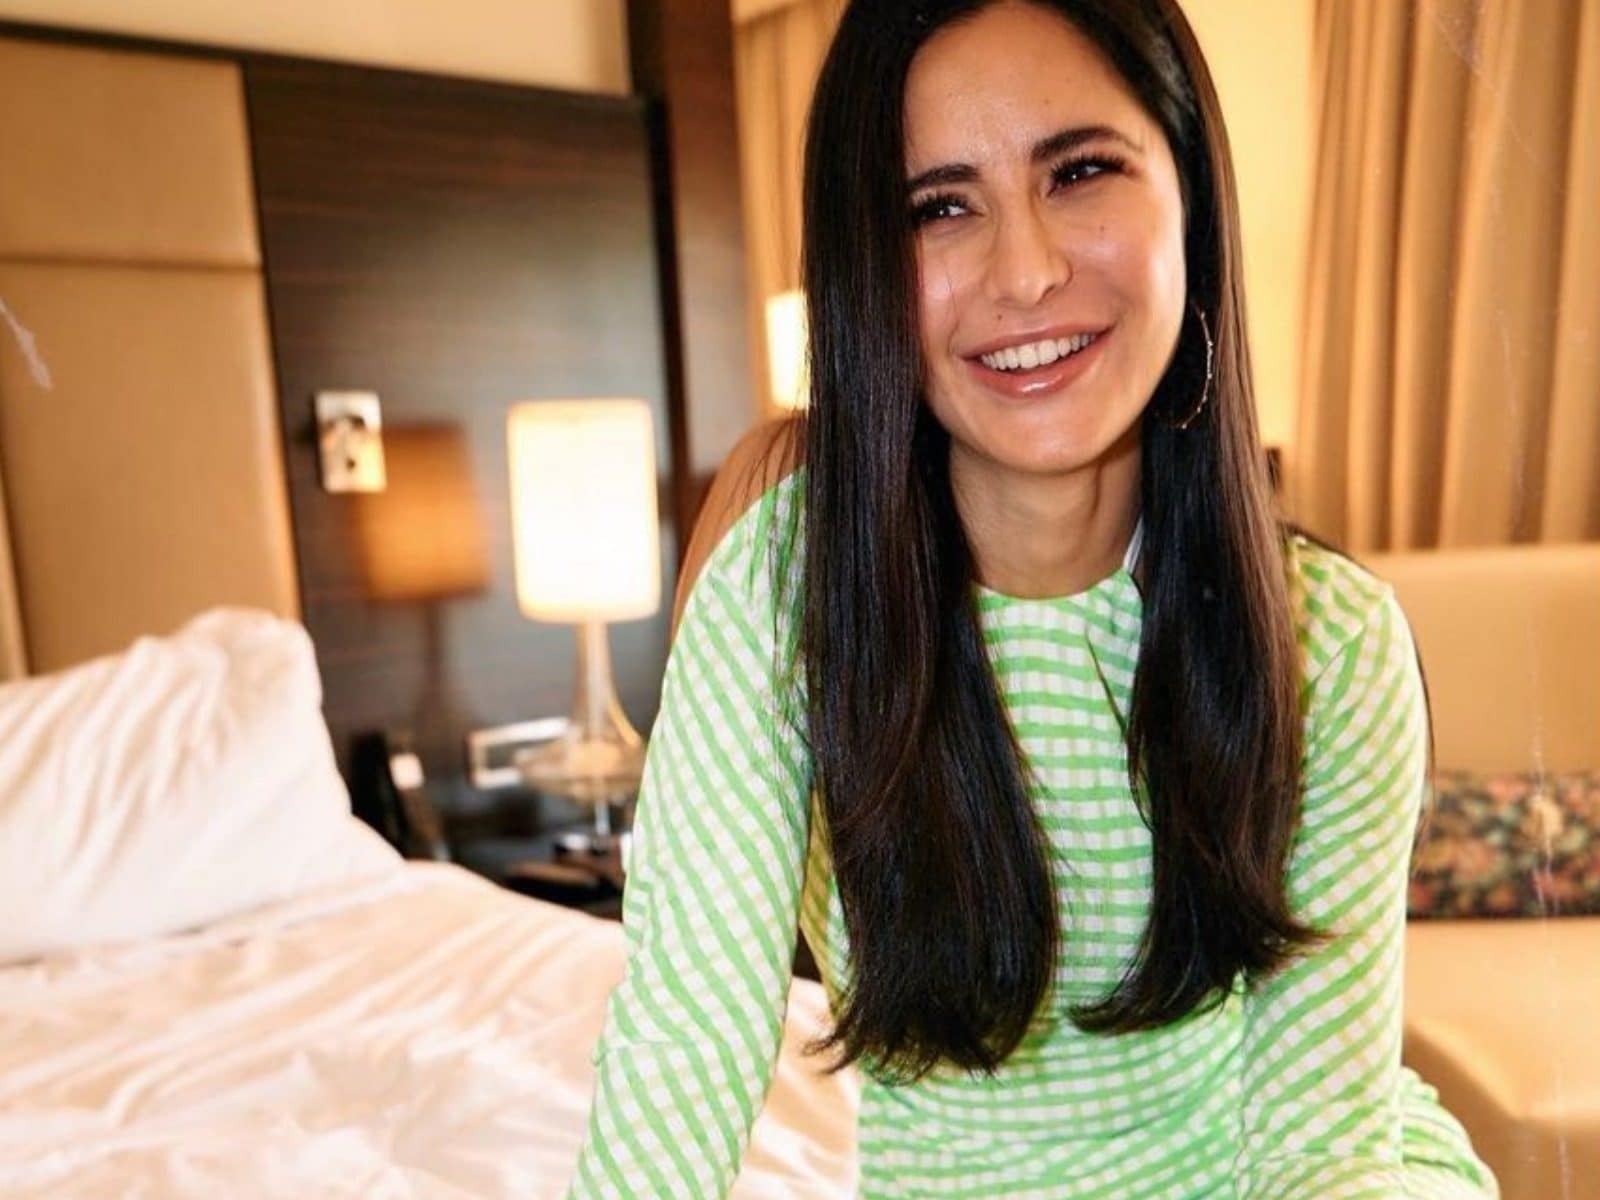 Katrina Xx Full Hd Photo - Katrina Kaif Is All Smiles As She Flaunts Her 'Saturday Hair' In New Pics;  Fans Call Her 'Gorgeous' - News18